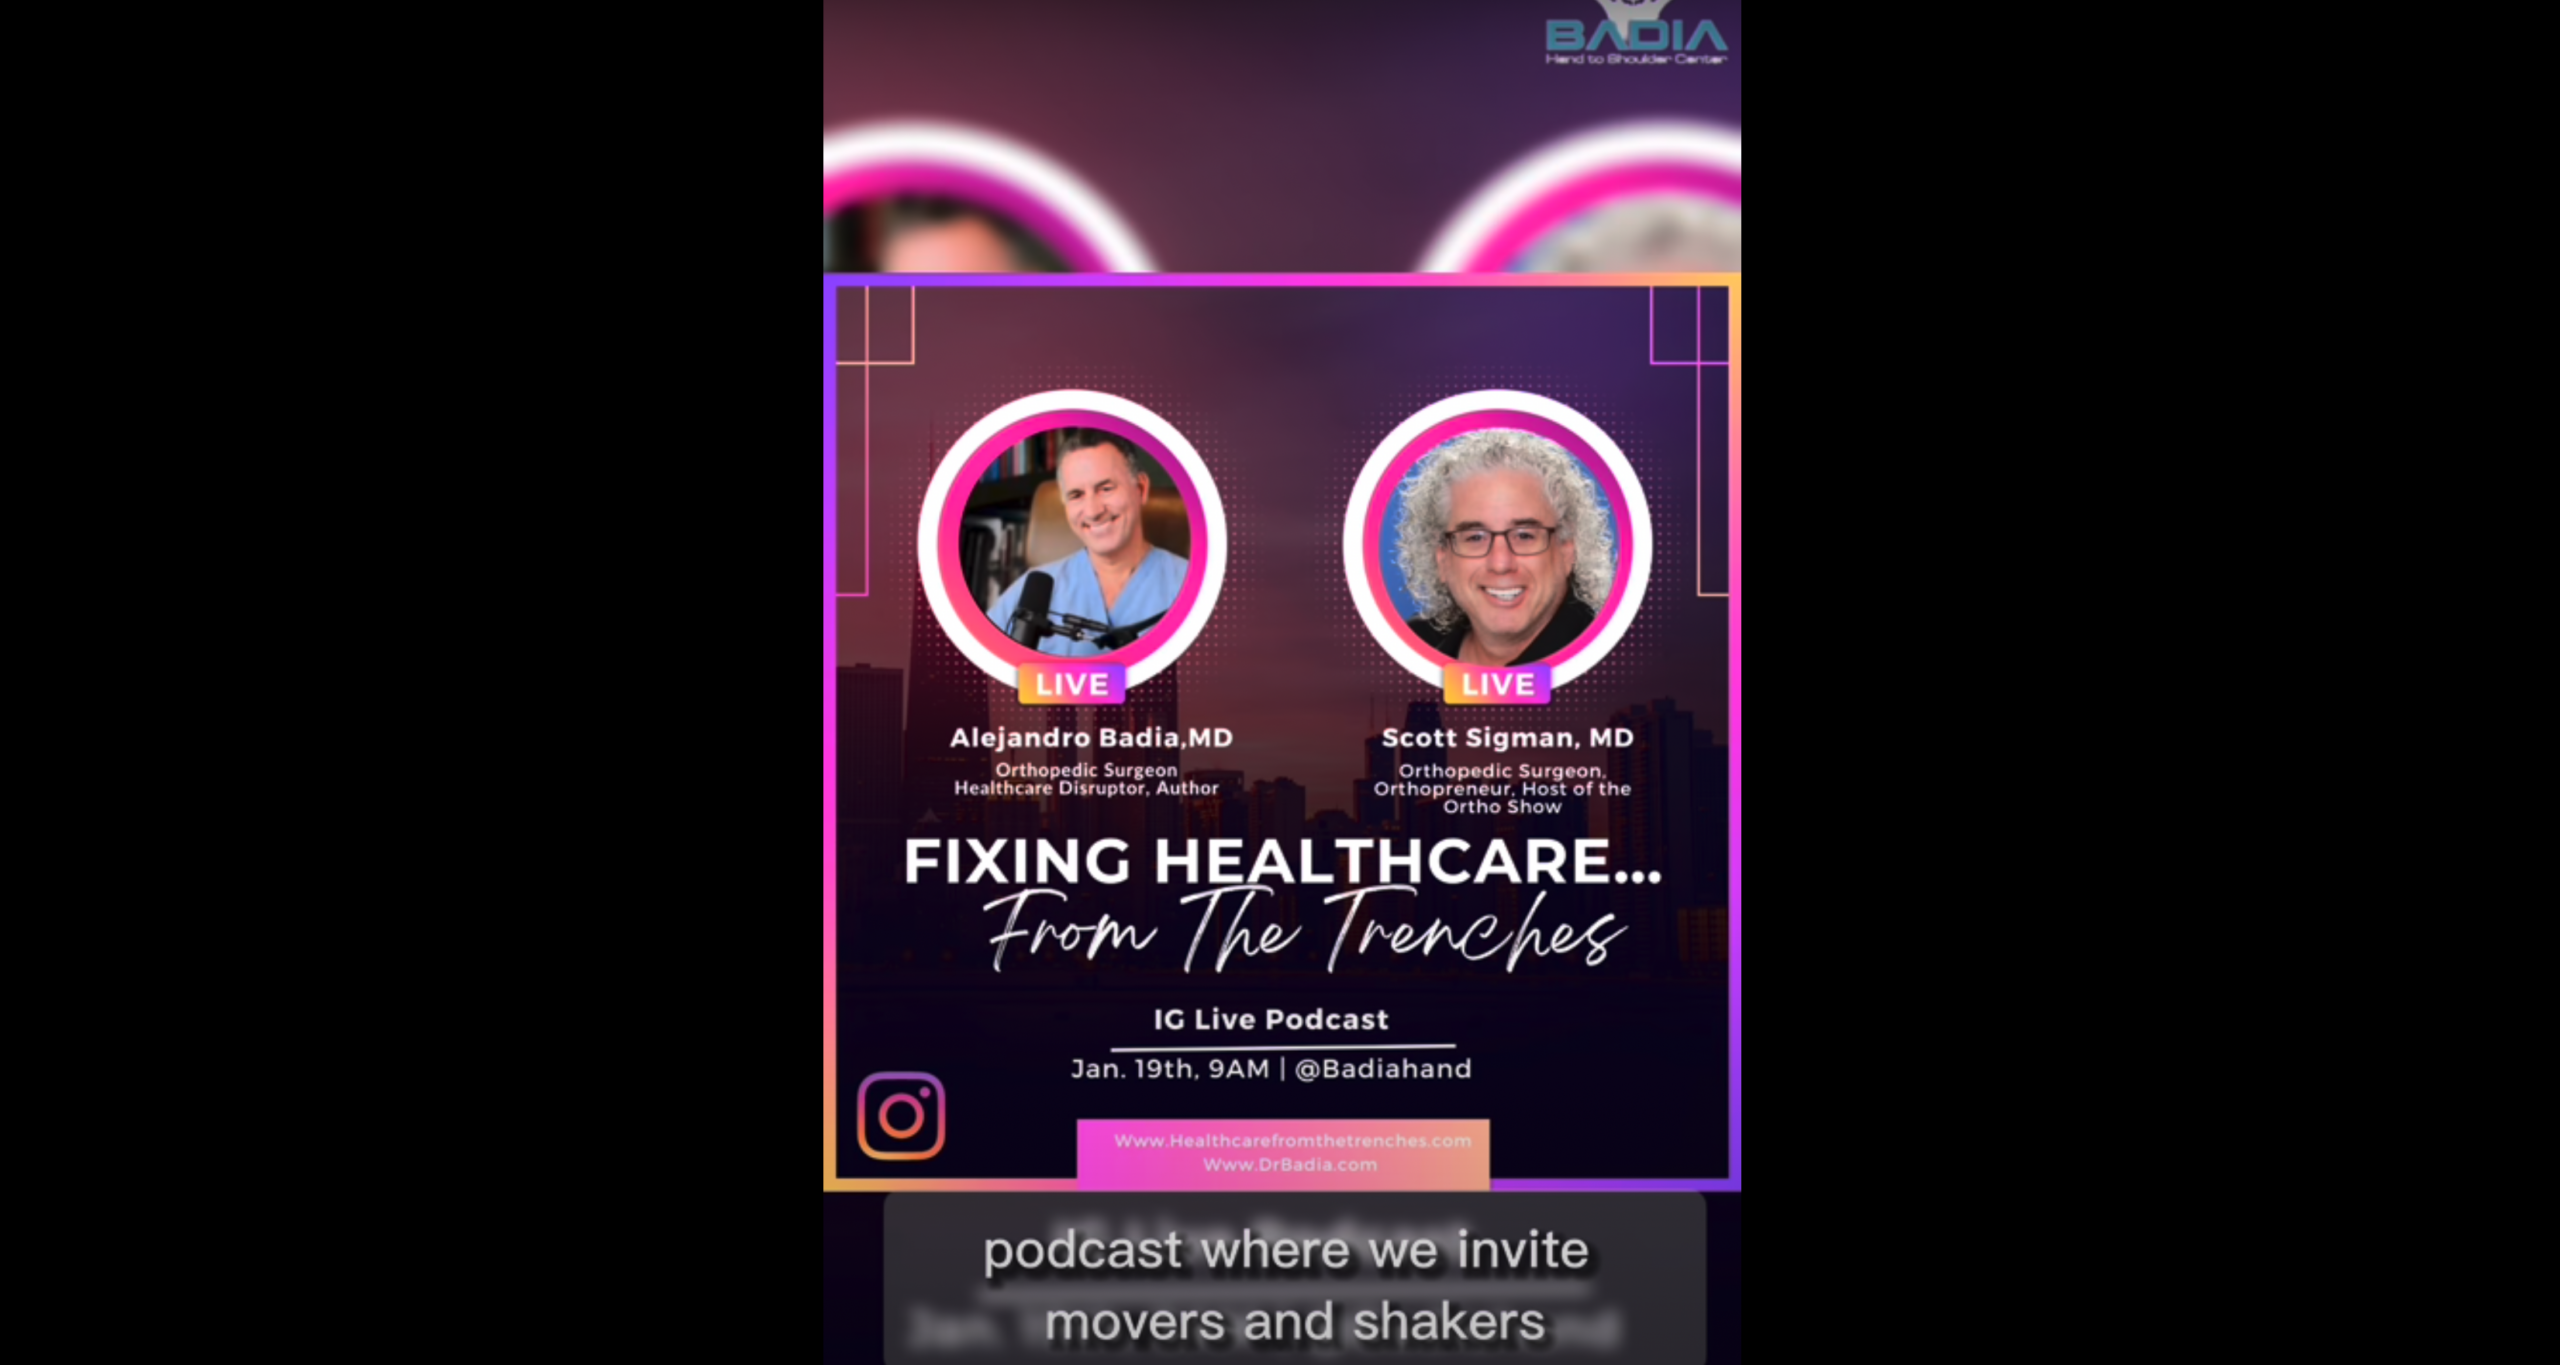  Episode 3 Recap! Fixing Healthcare...From The Trenches